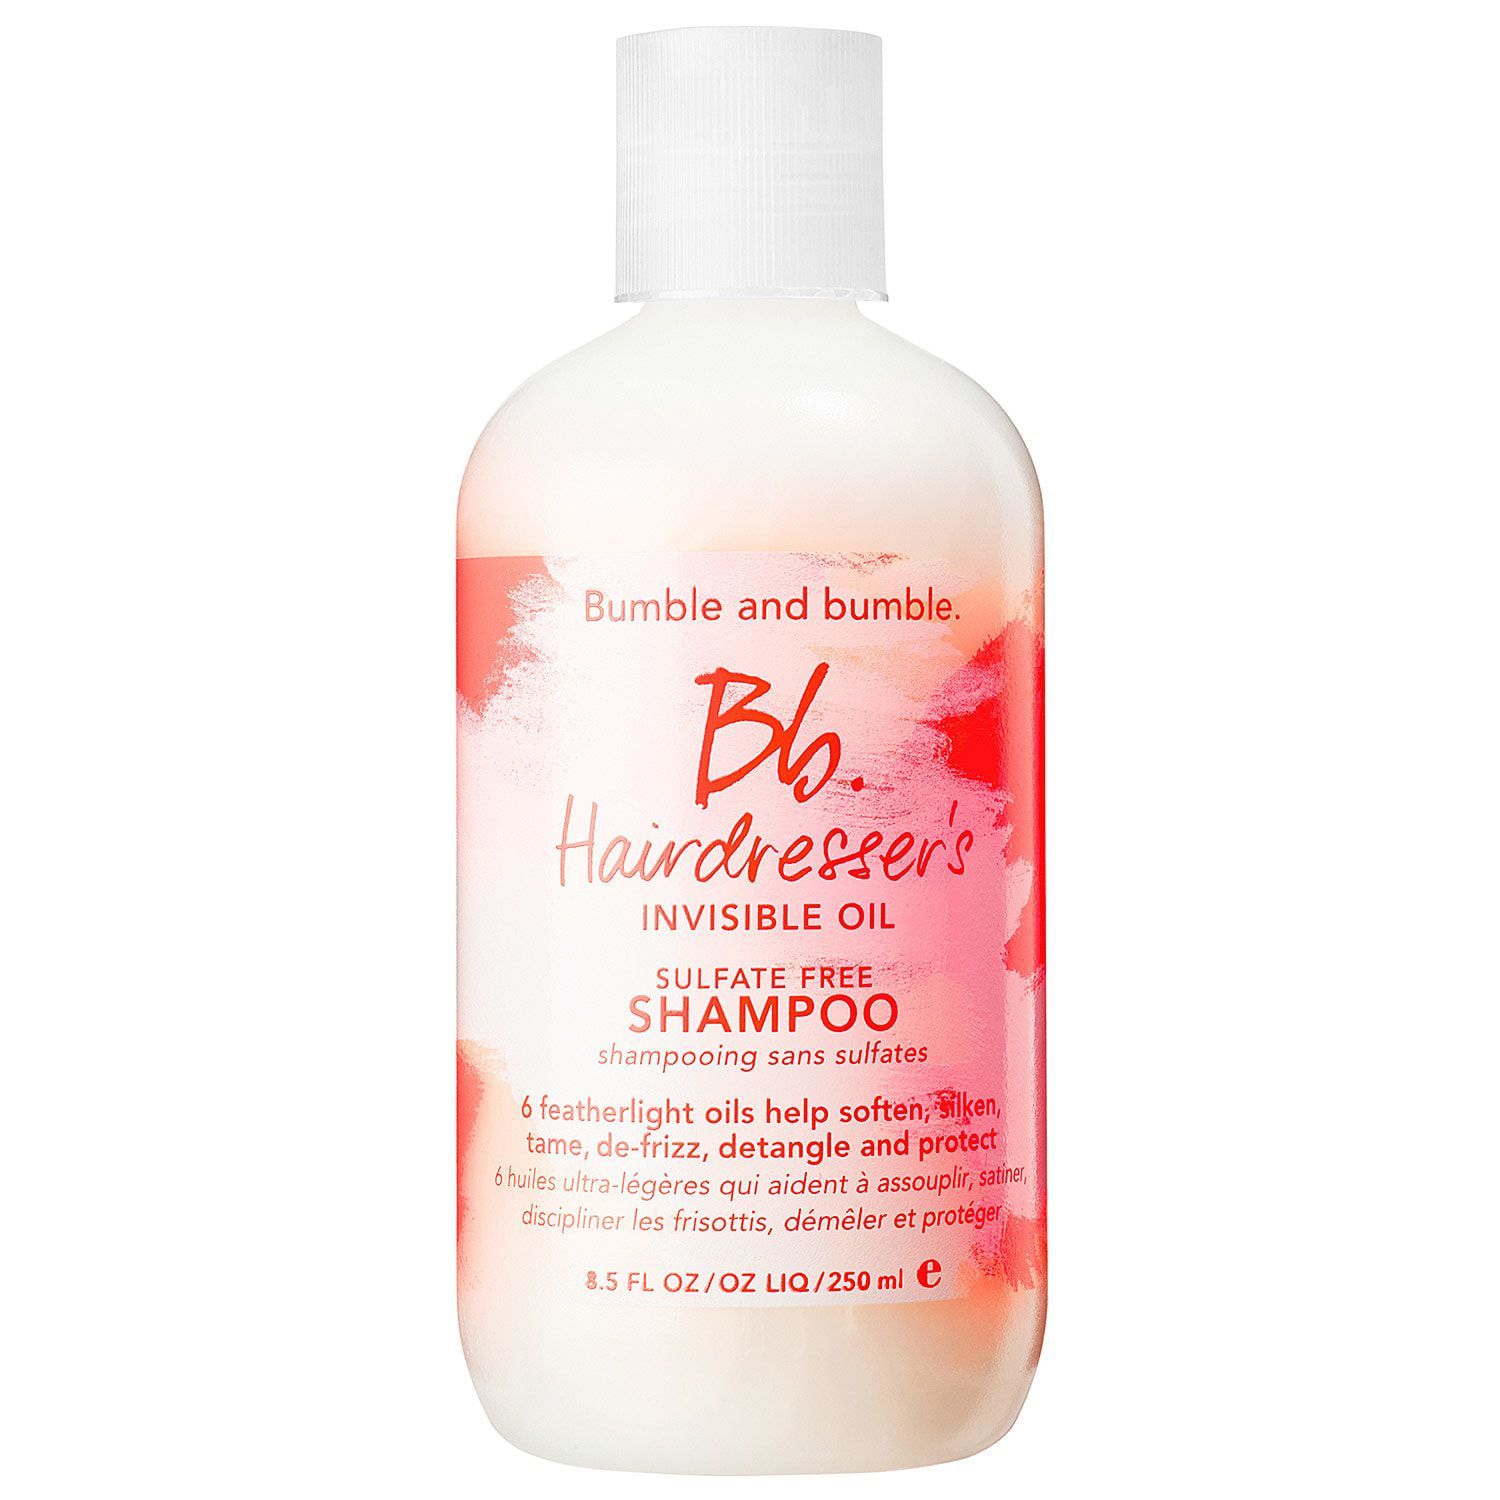 Bb.Hairdresser's Invisible Oil Sulfate Free Shampoo